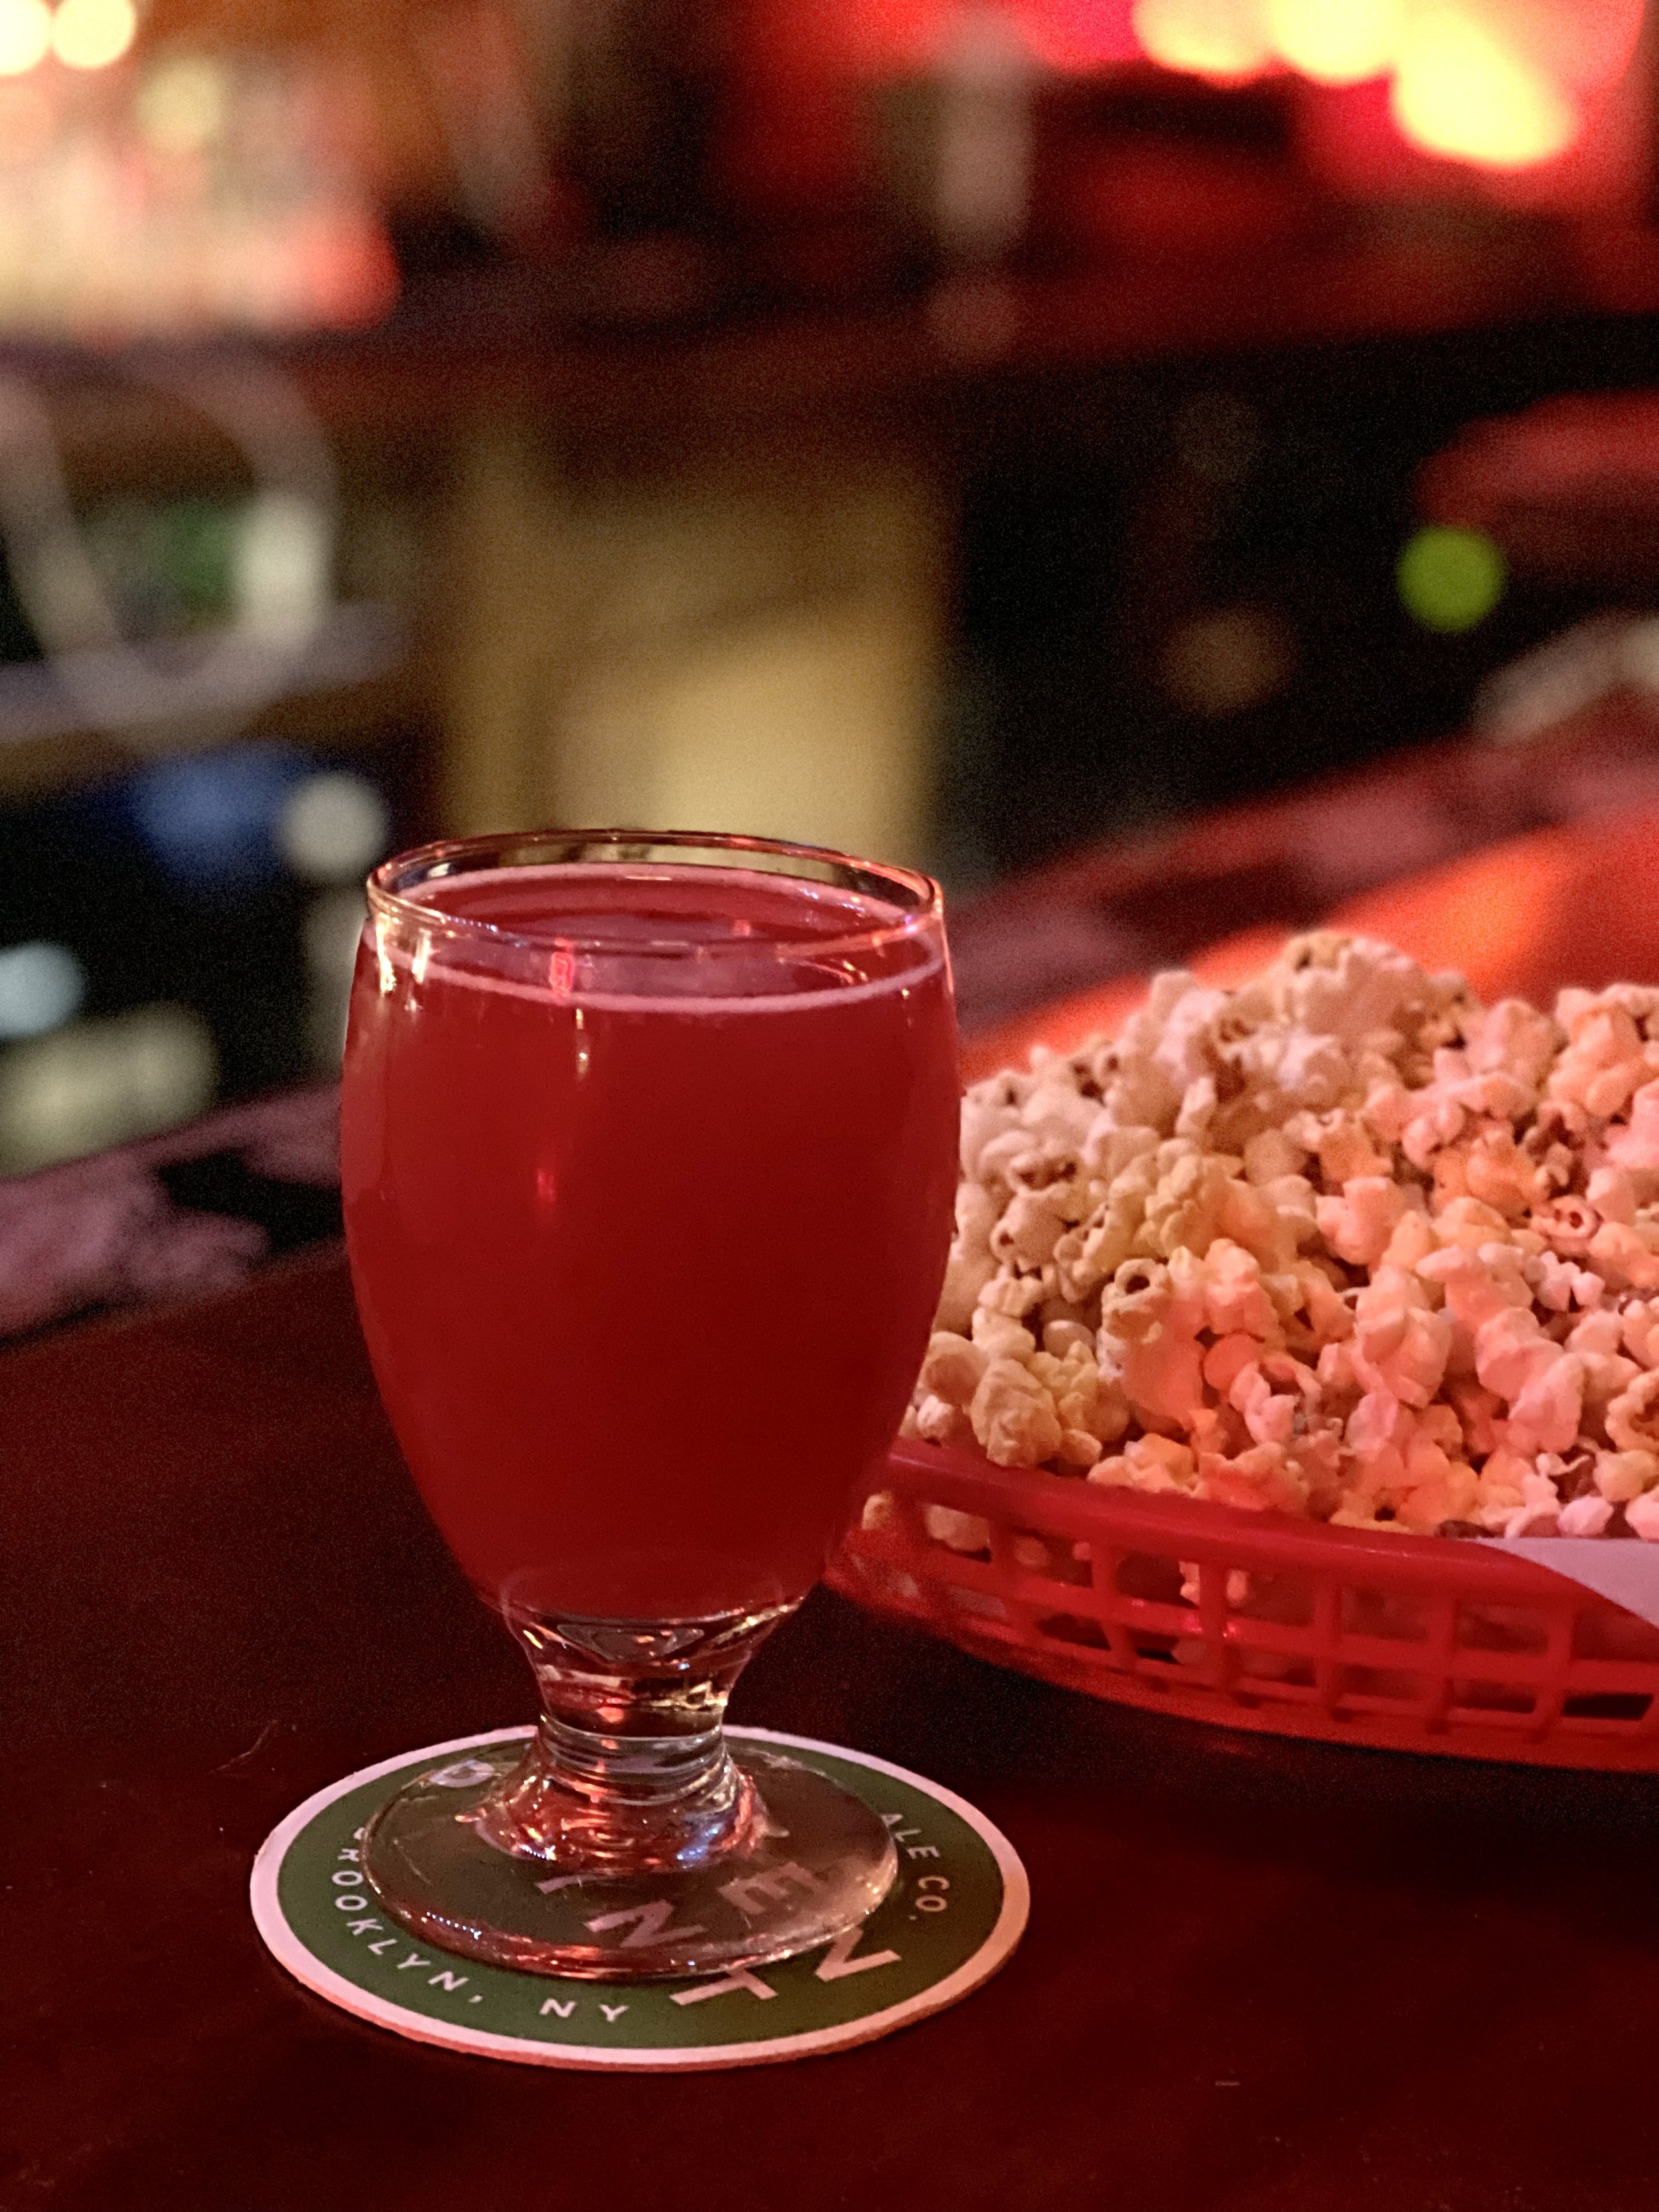 beer_red sour beer in a glass at a bar with popcorn IMG_2028.jpeg